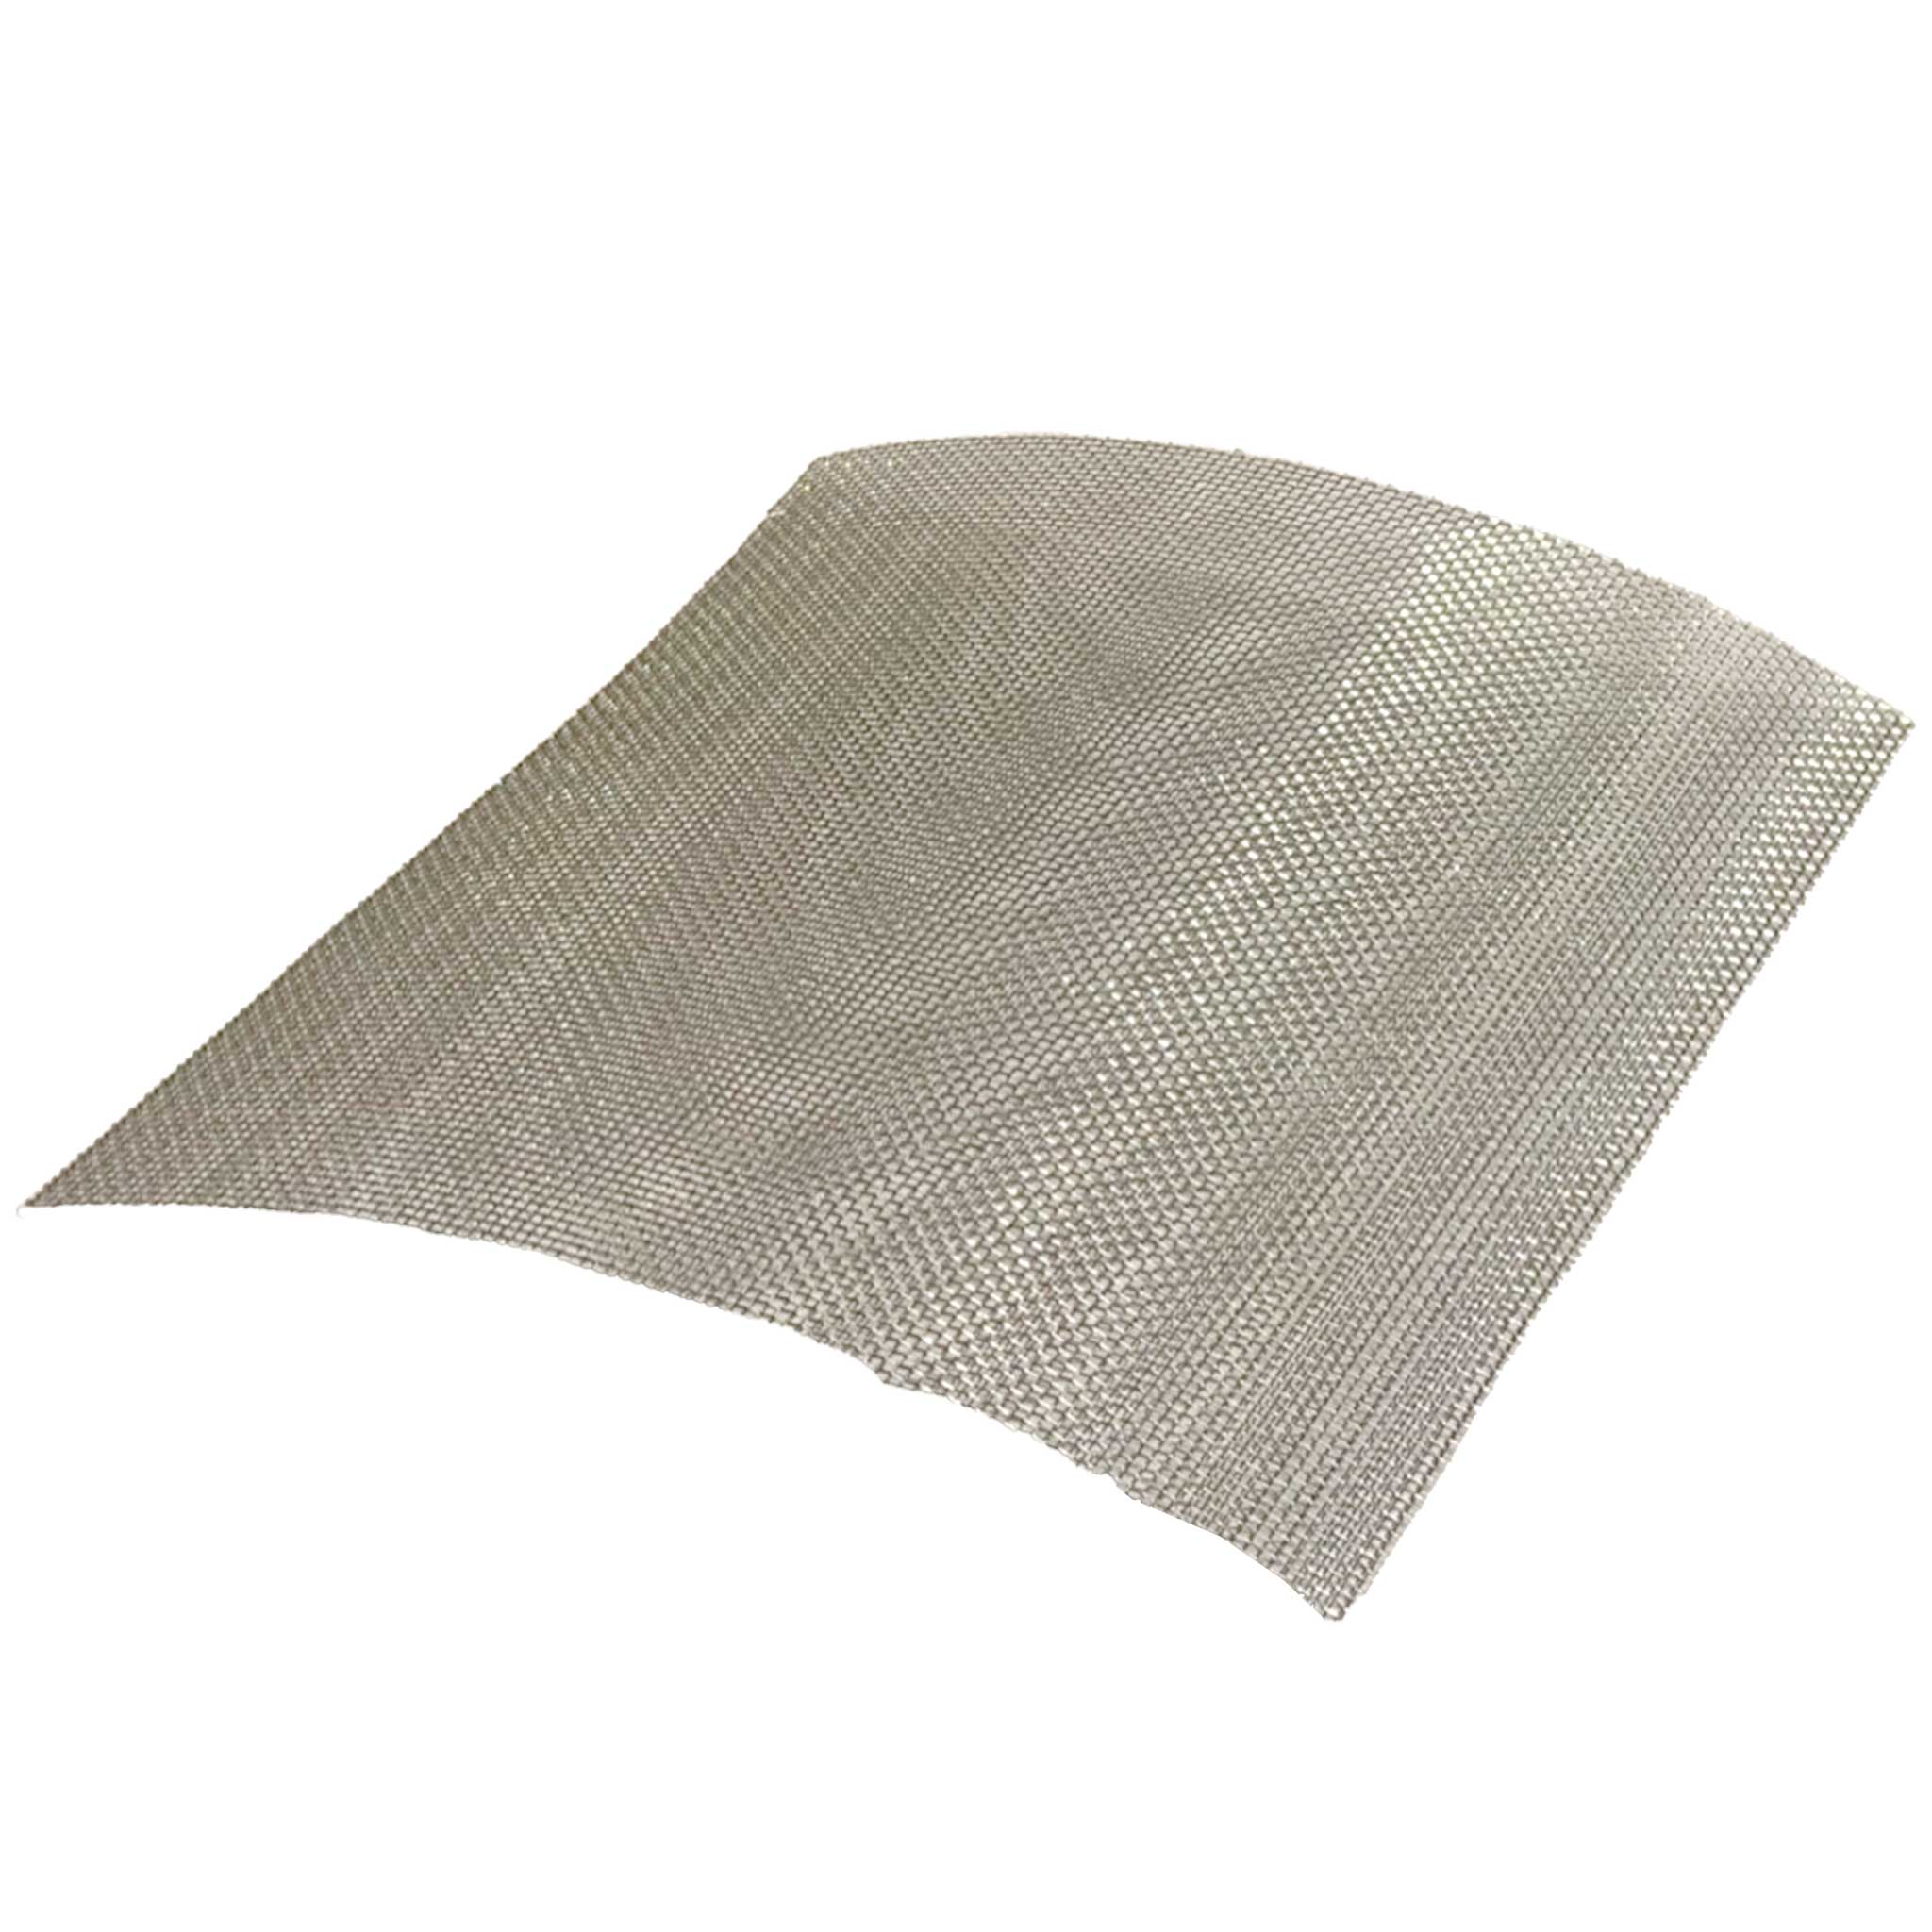 Woven Wire 8 Mesh Screen Grill Stainless-Steel - Hive Parts collection by Buzzbee Beekeeping Supplies